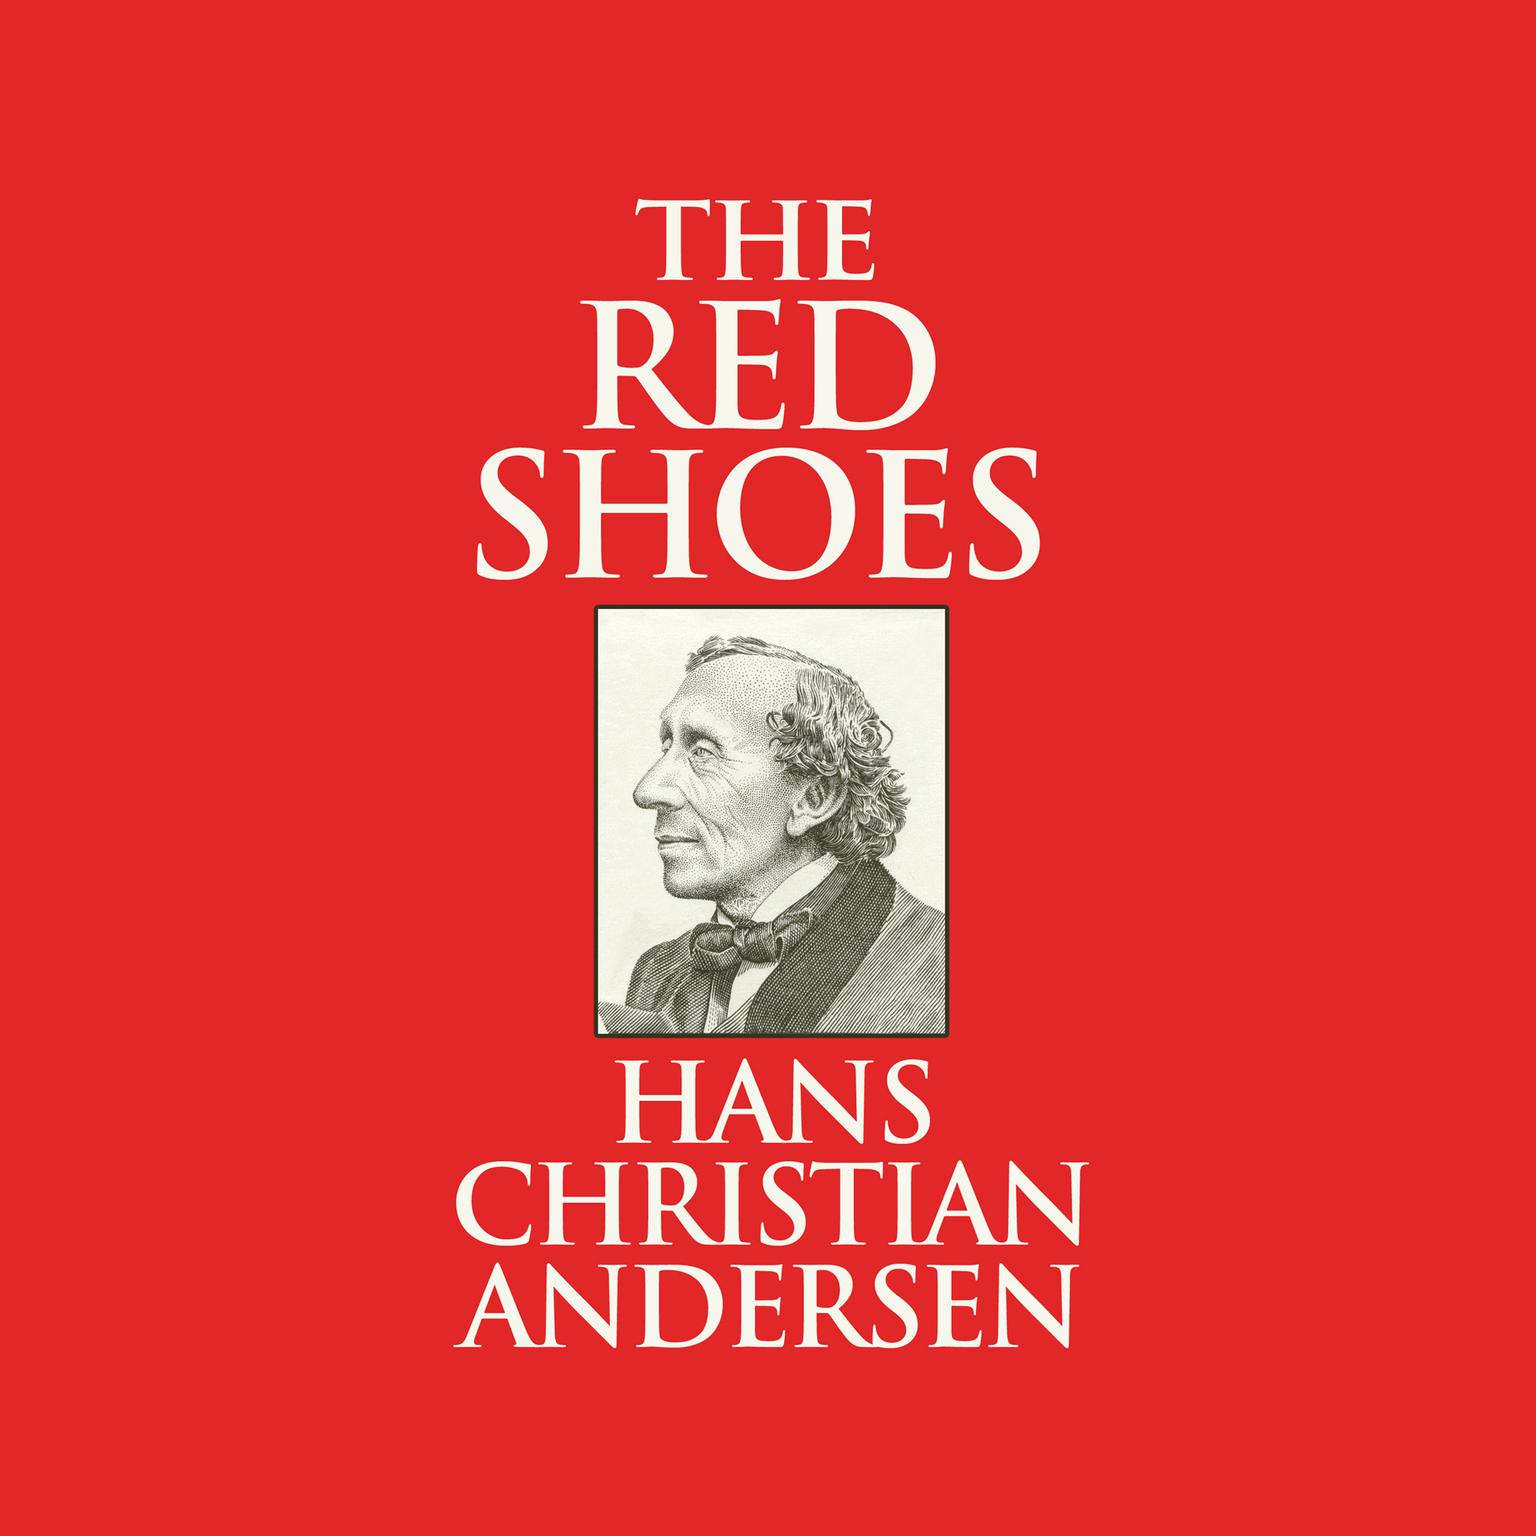 The Red Shoes Audiobook, by Hans Christian Andersen